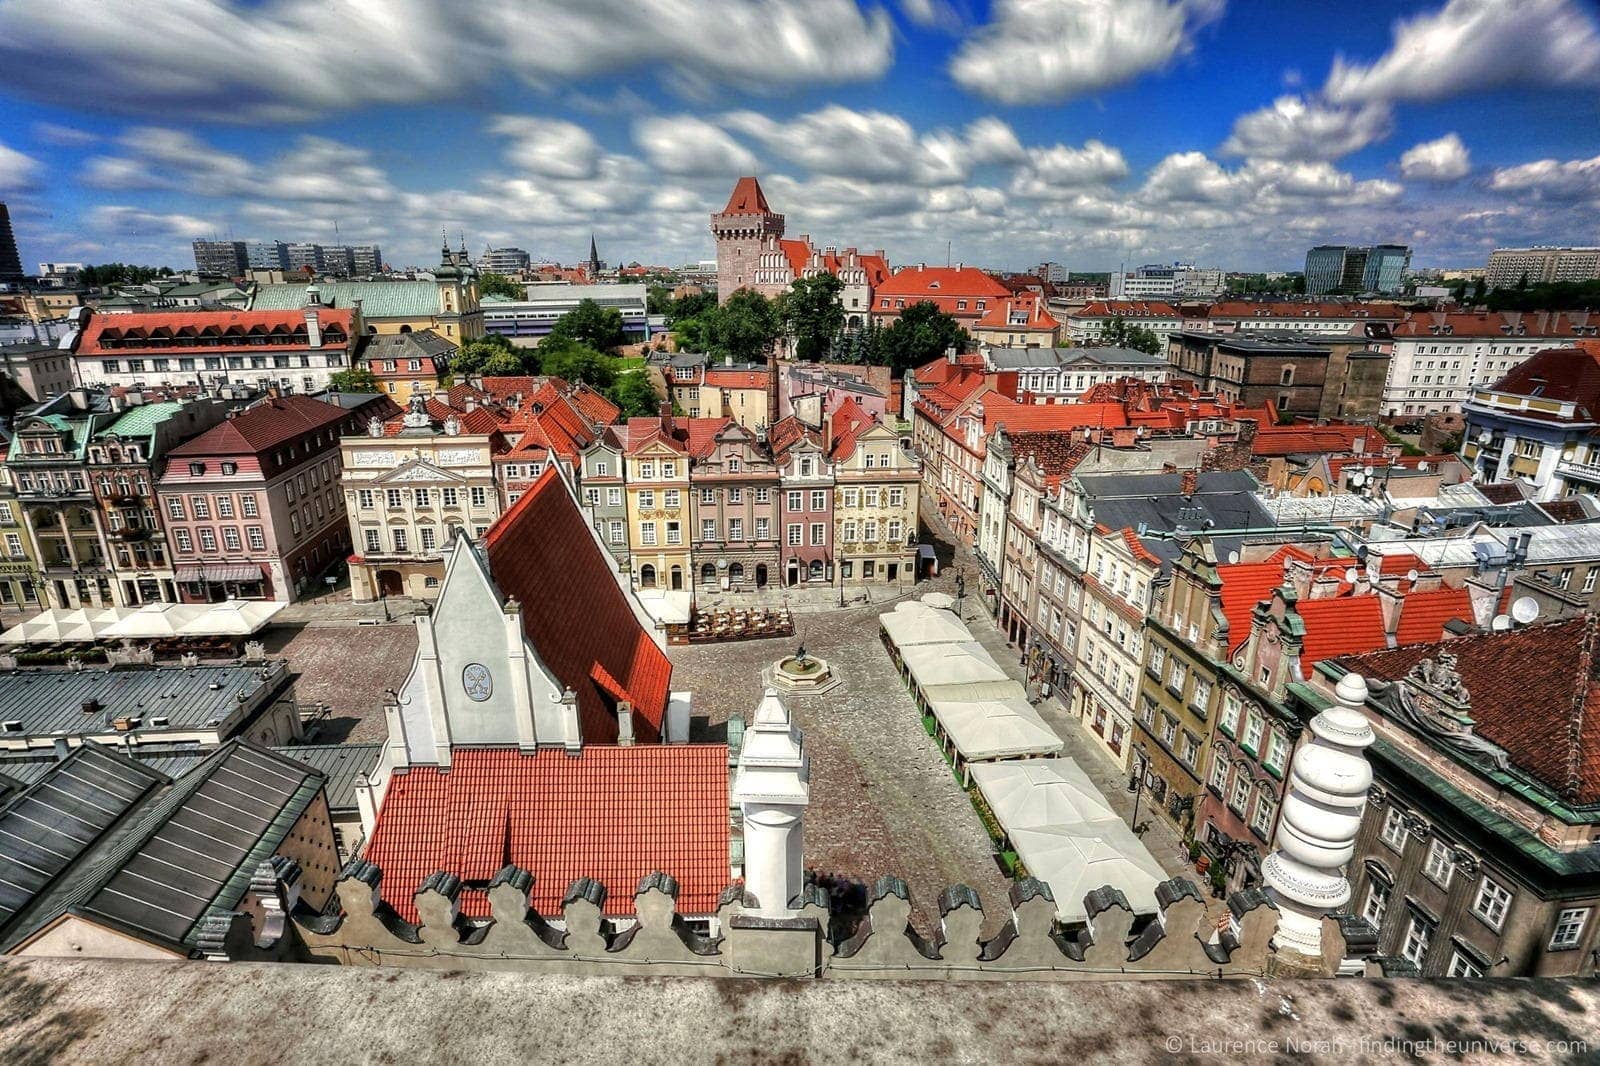 summer festivals in poznan - View from top of town hall Poznan market square scaled